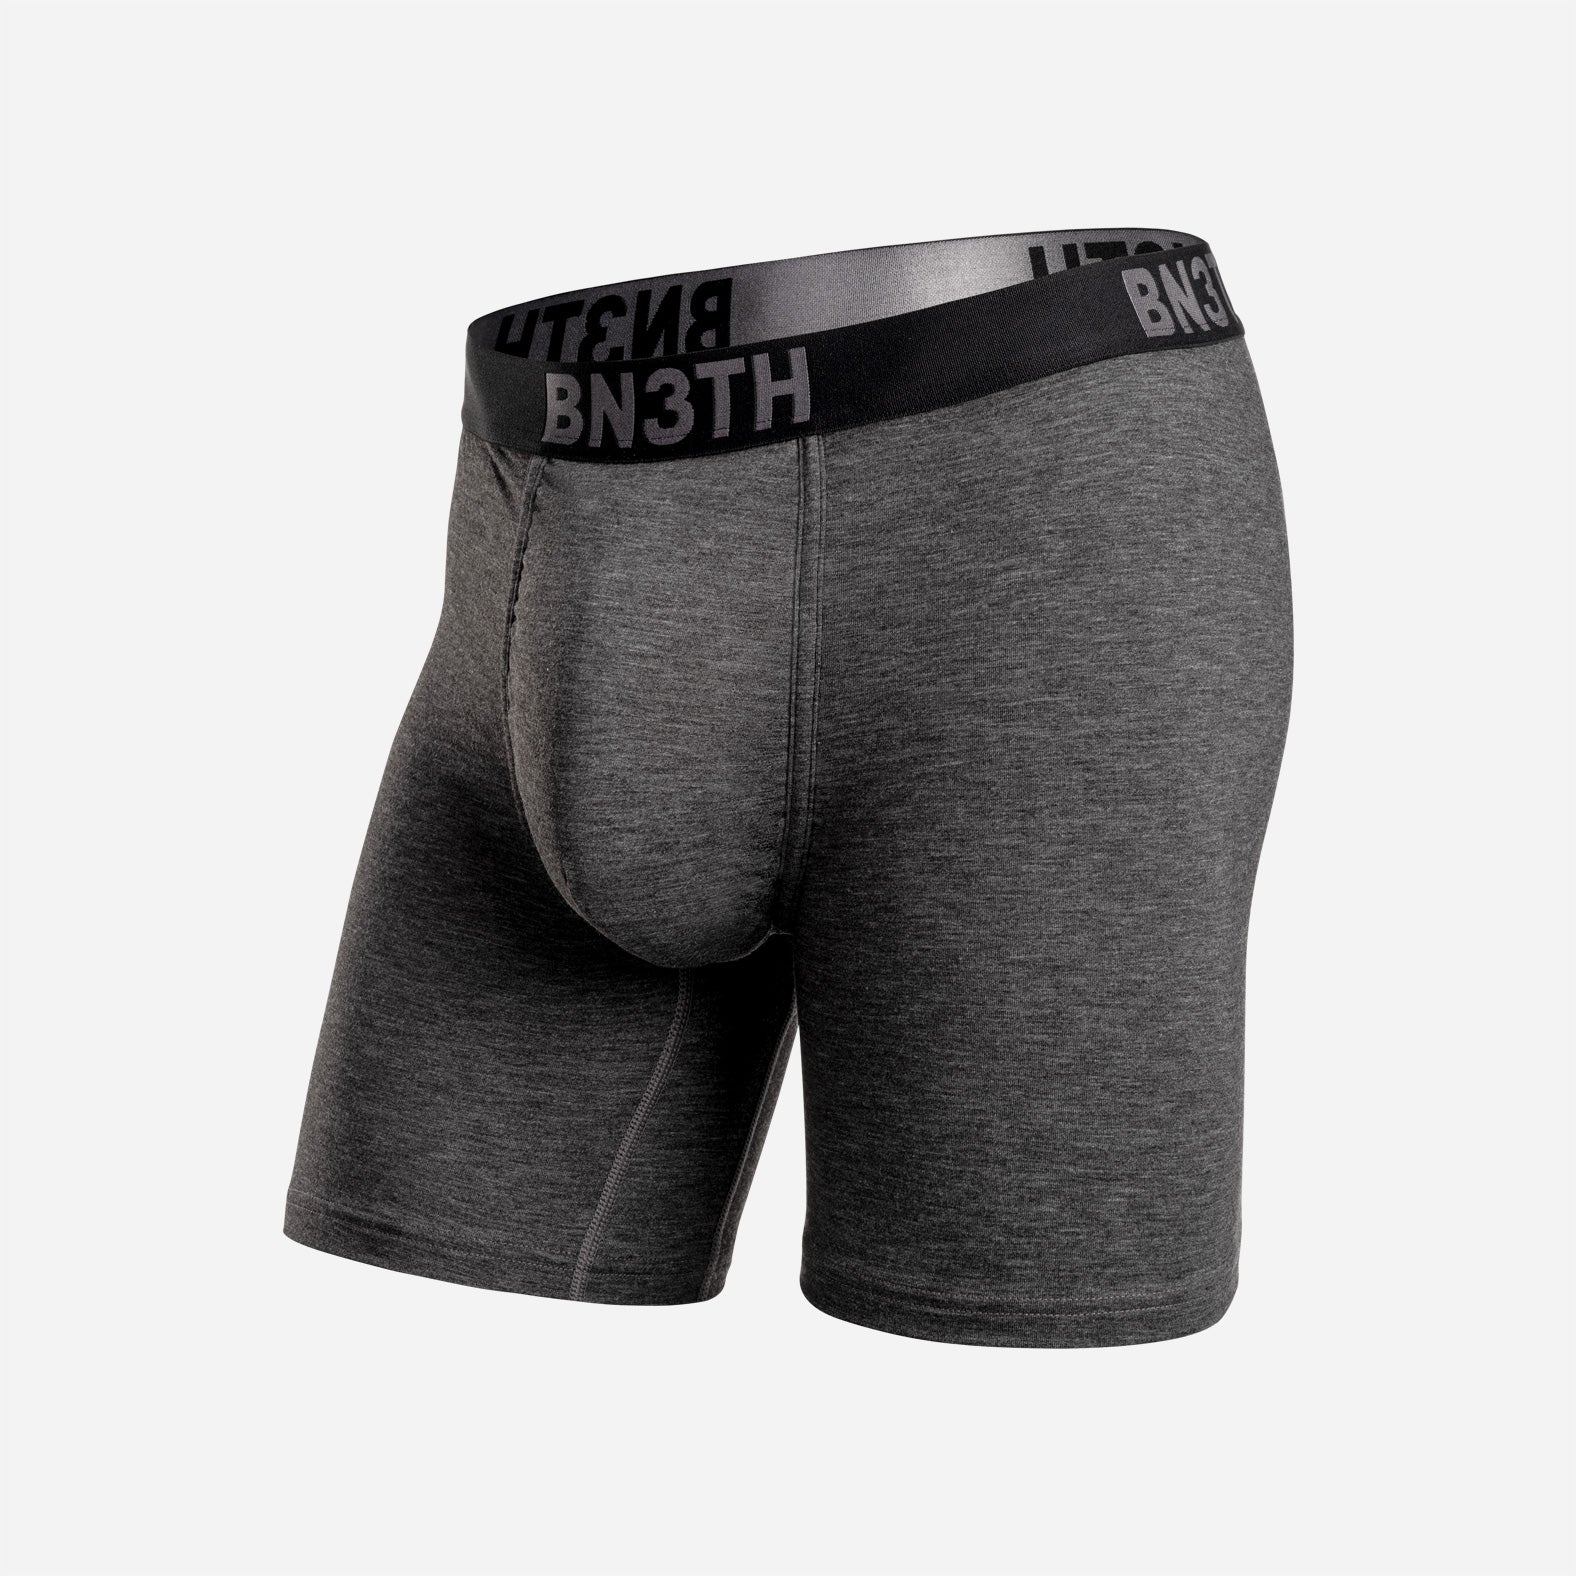 BN3TH Makes Its Debut at The PGA Show With Infinite Boxer Briefs